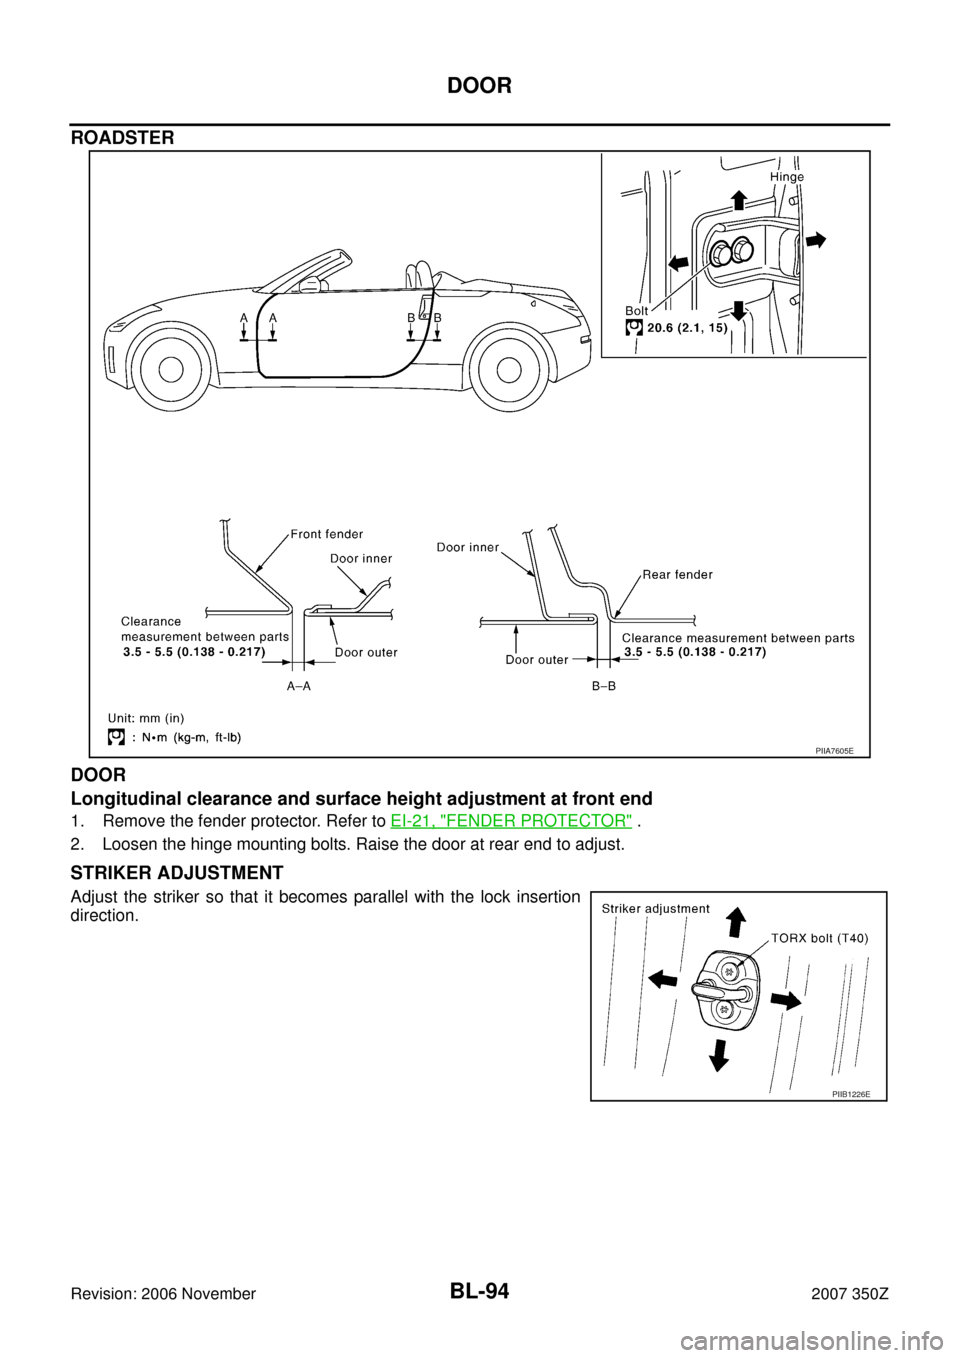 NISSAN 350Z 2007 Z33 Body, Lock And Security System Owners Manual BL-94
DOOR
Revision: 2006 November2007 350Z
ROADSTER
DOOR
Longitudinal clearance and surface height adjustment at front end
1. Remove the fender protector. Refer to EI-21, "FENDER PROTECTOR" .
2. Loos